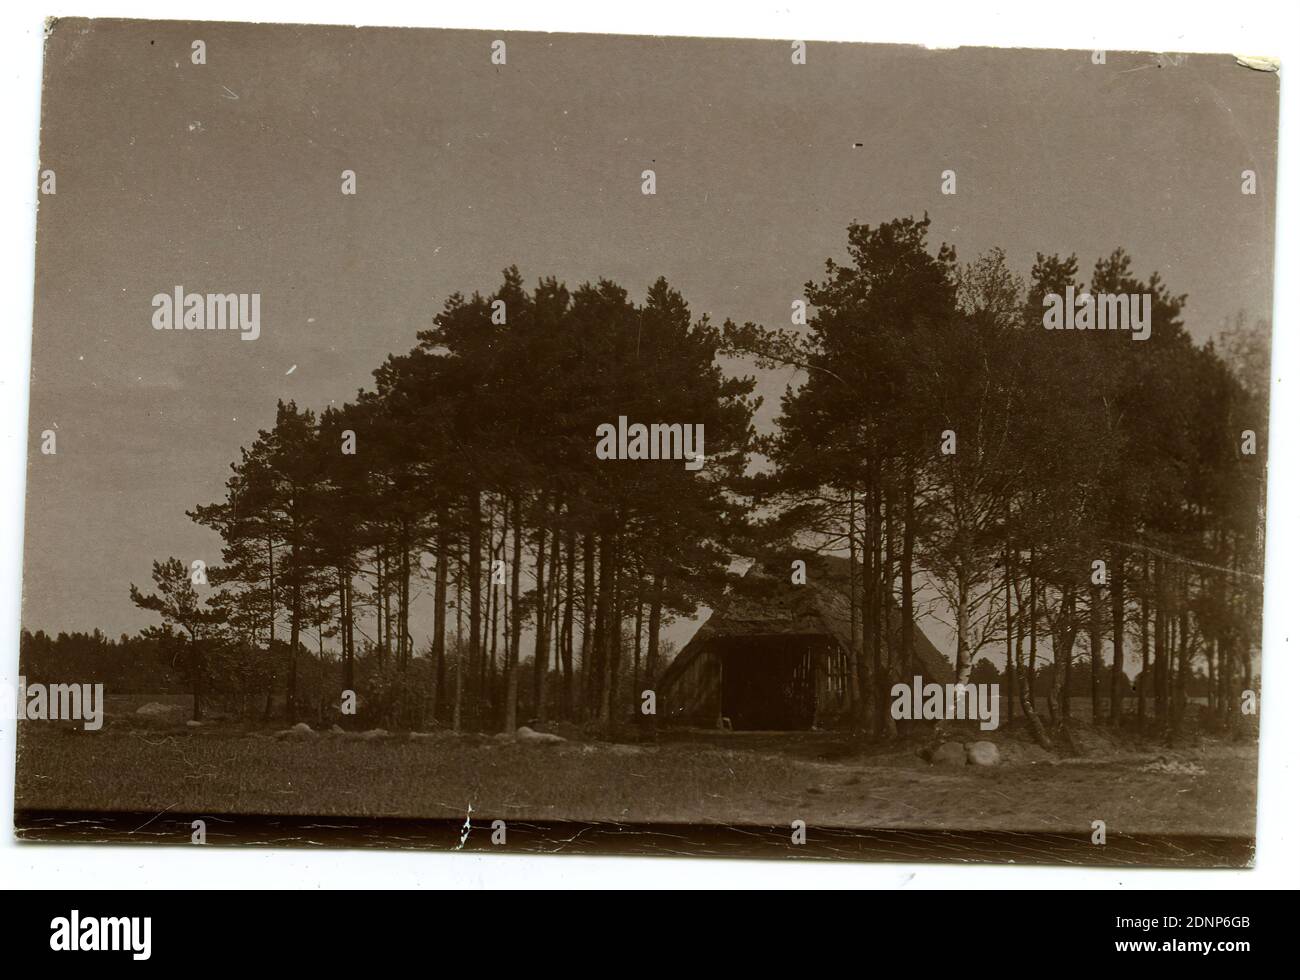 Heinrich Hamann, Atelier J. Hamann, Johann Hinrich W. Hamann, Barn in a group of trees, silver gelatine paper, black and white positive process, Total: Height: 5.20 cm; Width: 7.90 cm, Reporting photography, trees, shrubs, barn Stock Photo